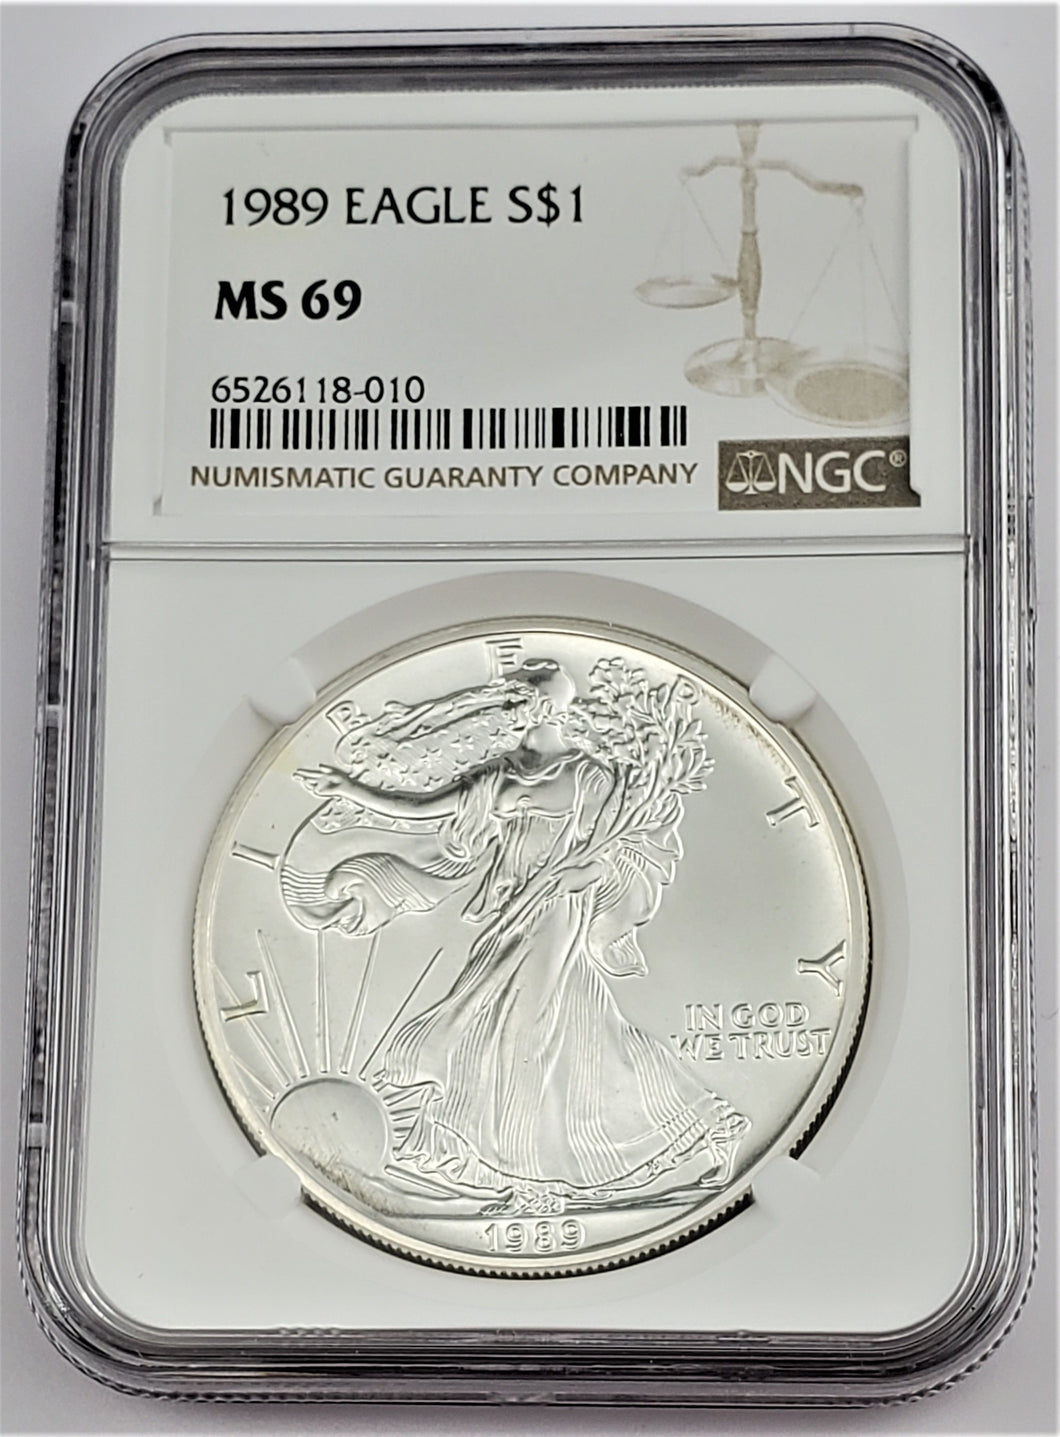 1989 American Silver Eagle $1 NGC MS 69 .999 Fine Silver Coin